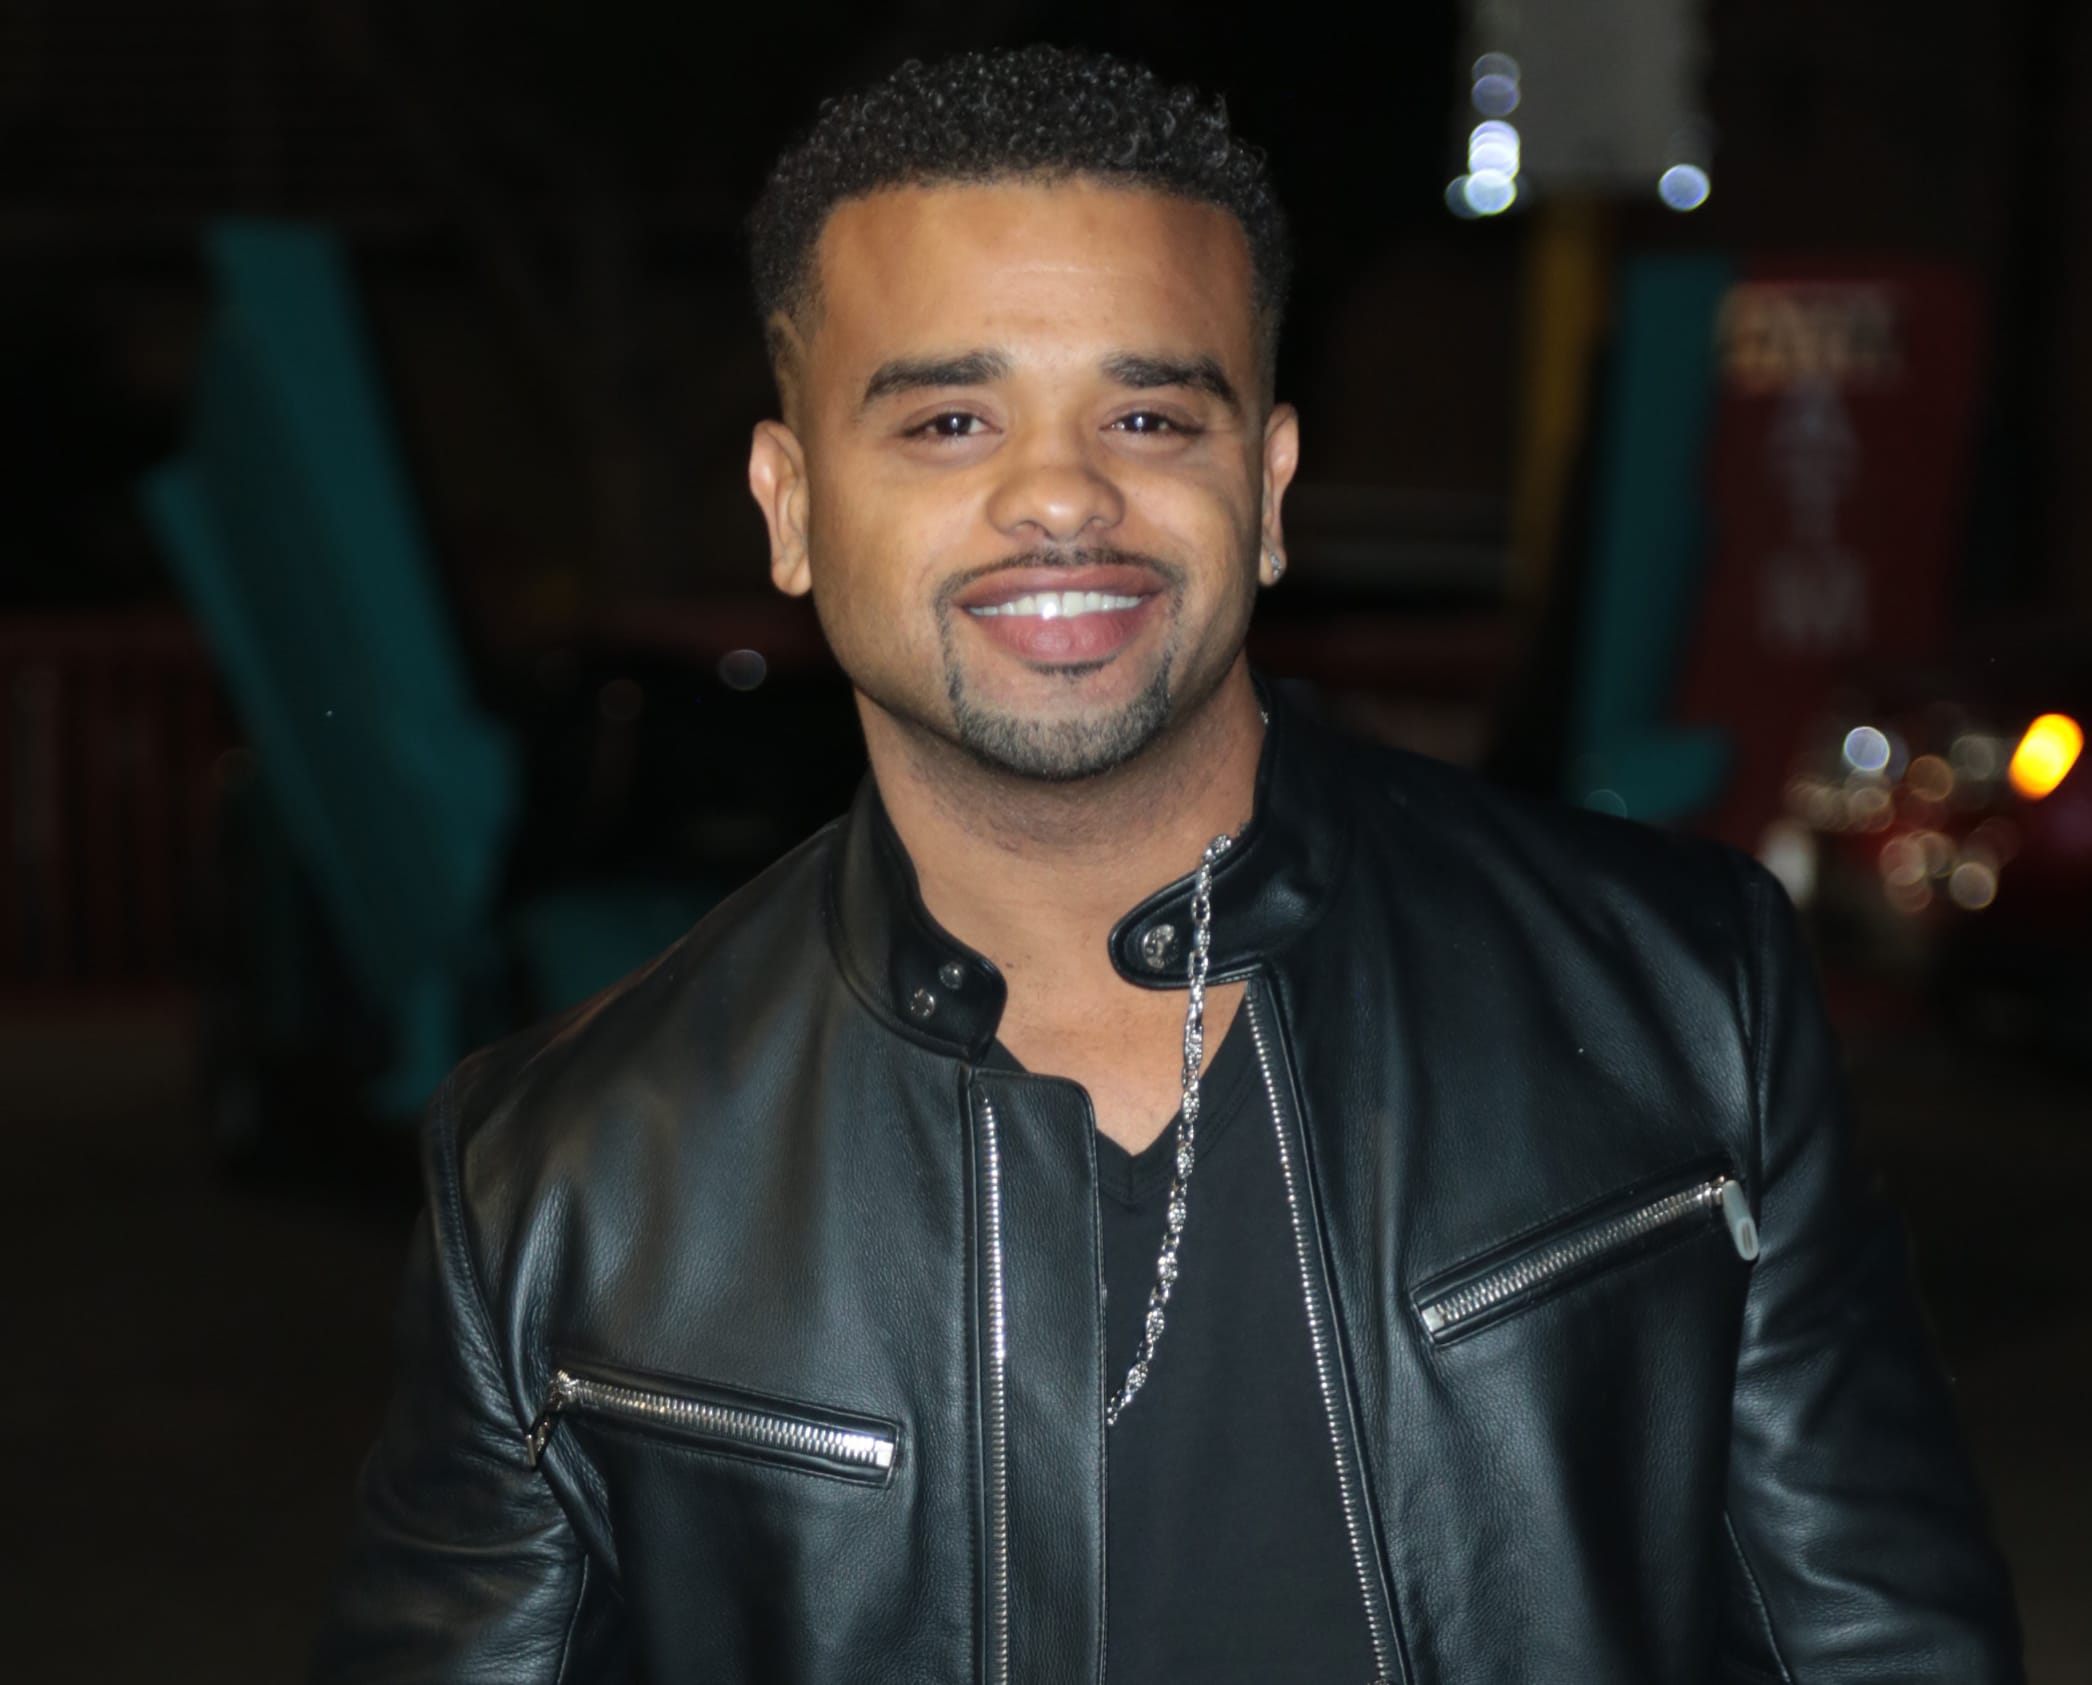 Raz B Facing Domestic Violence Charge After Allegedly Strangling Girlfriend